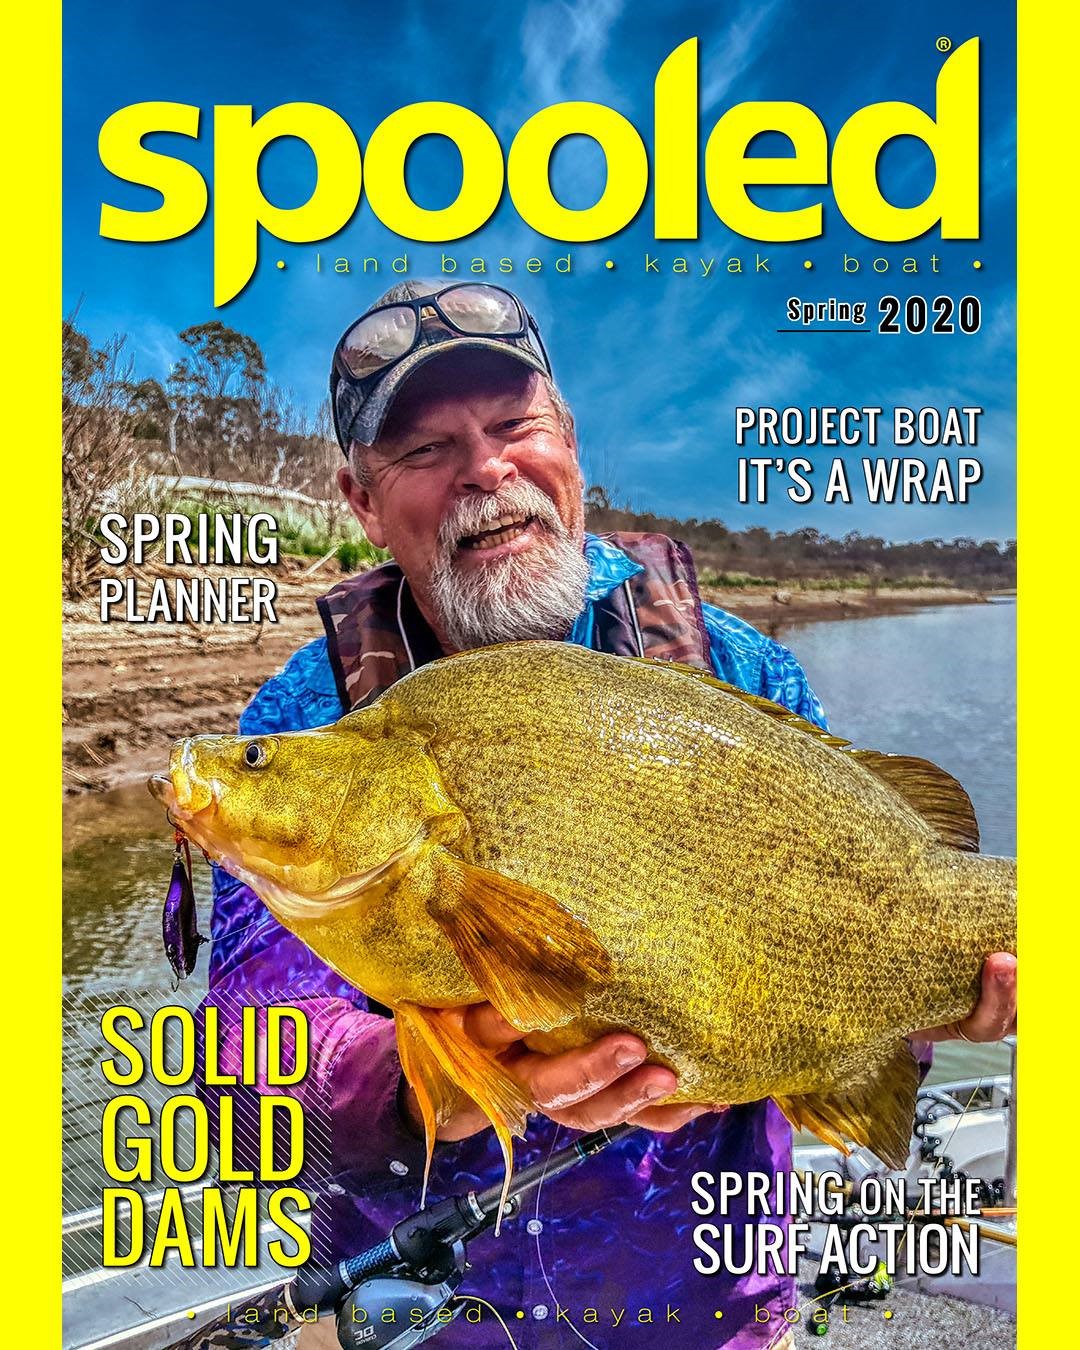 Spooled magazine October 2020 cover